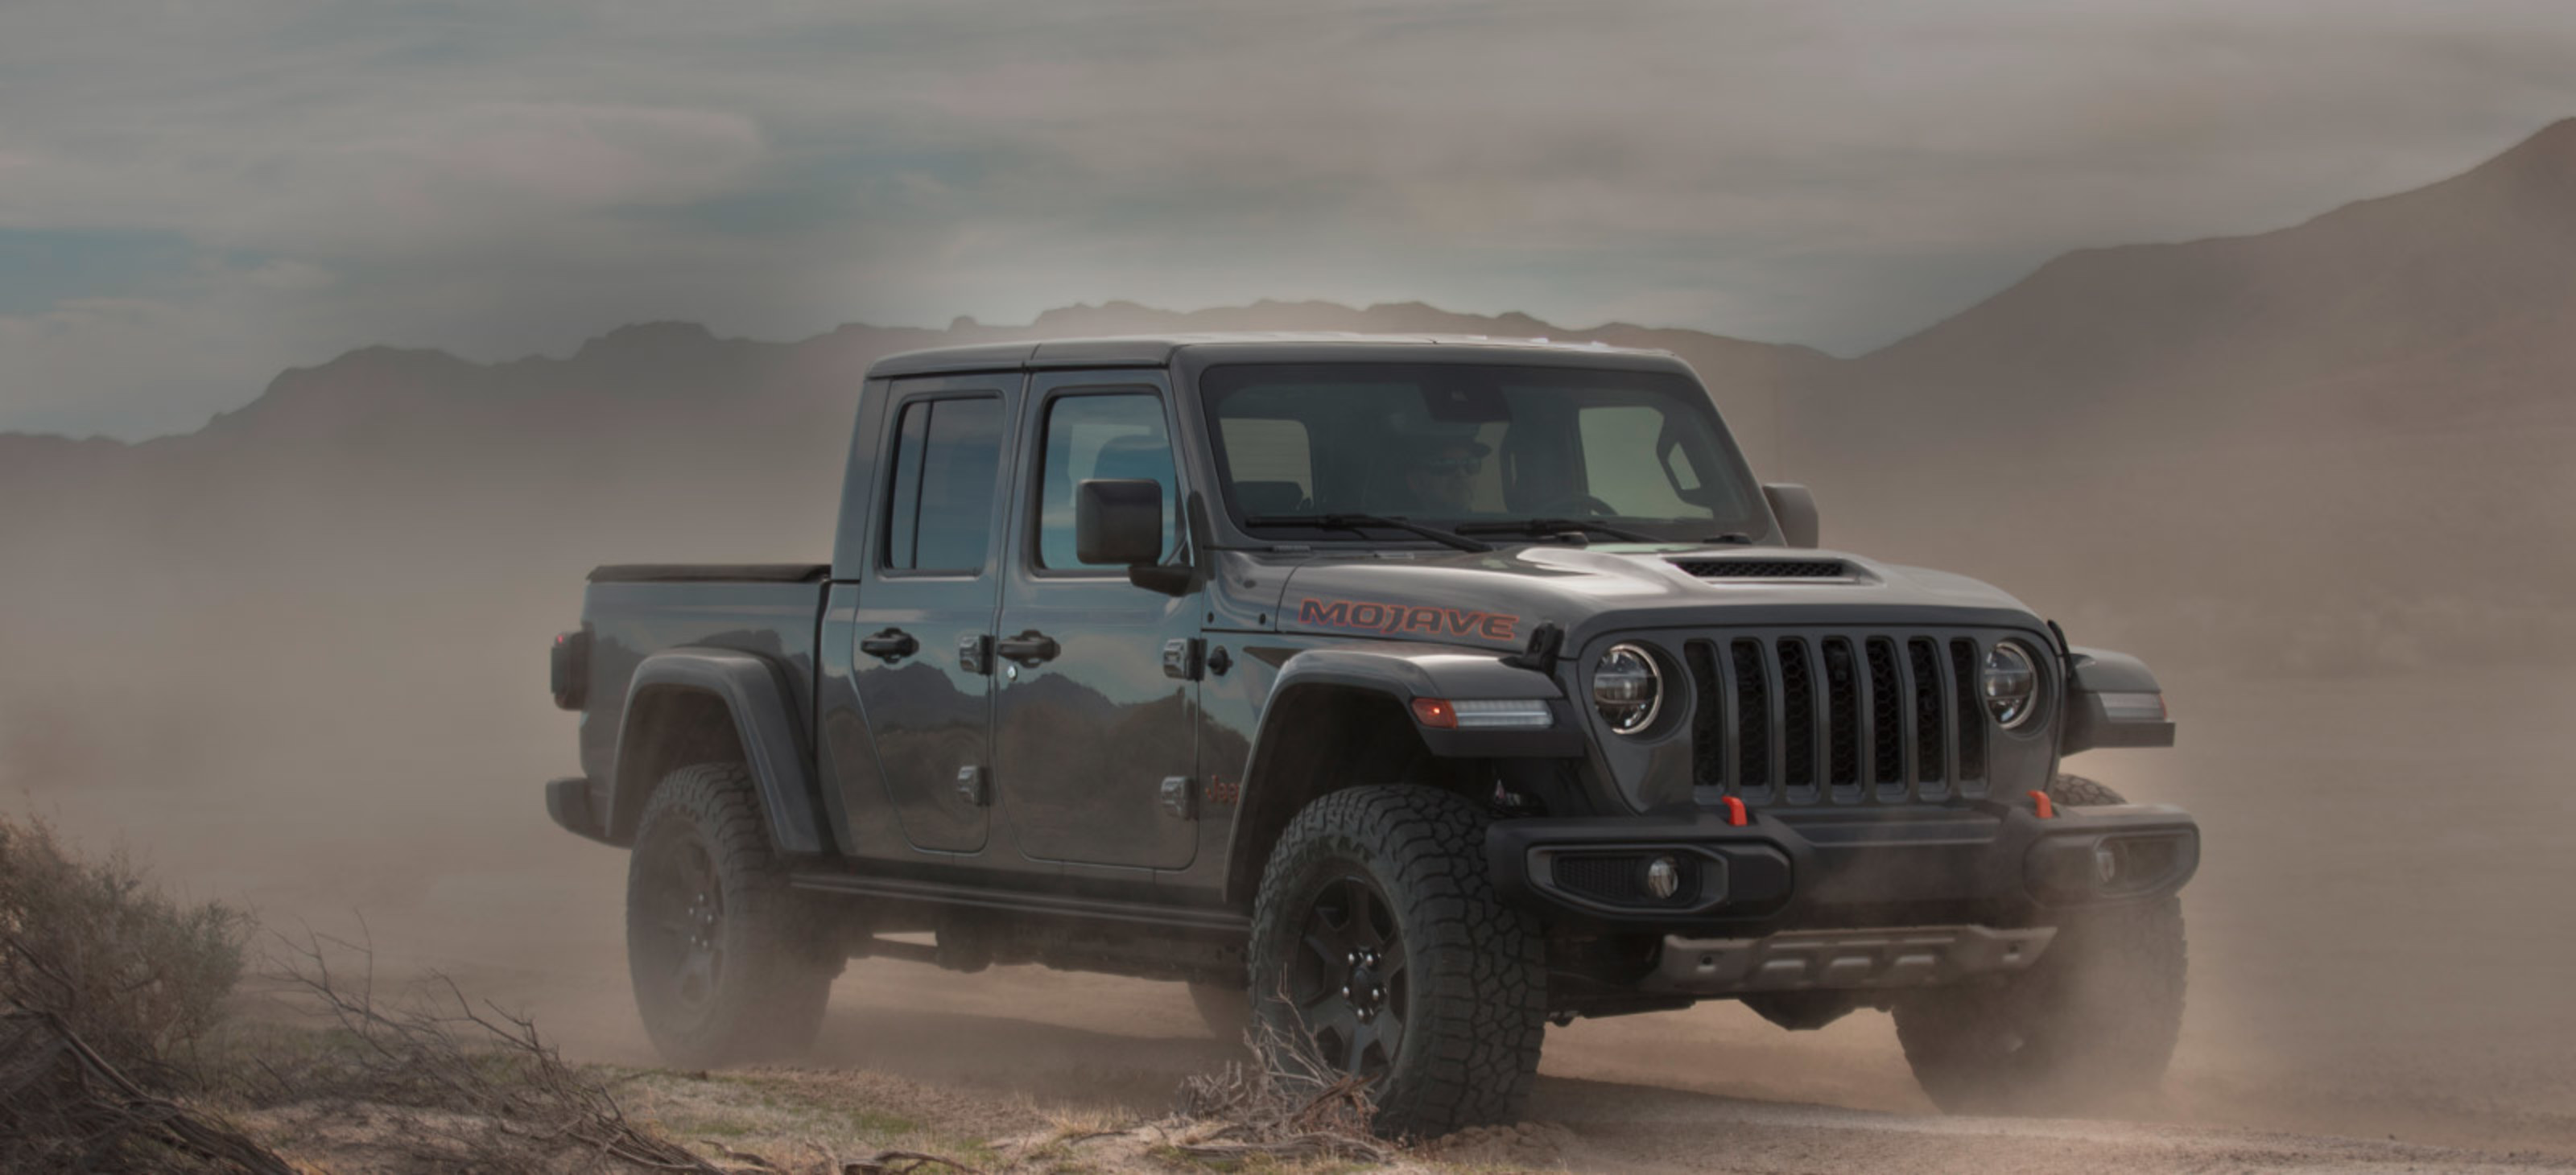 A front view of a Sting-Grey 2021 Jeep Gladiator Mojave being driven on a desert road as dust swirls around it.